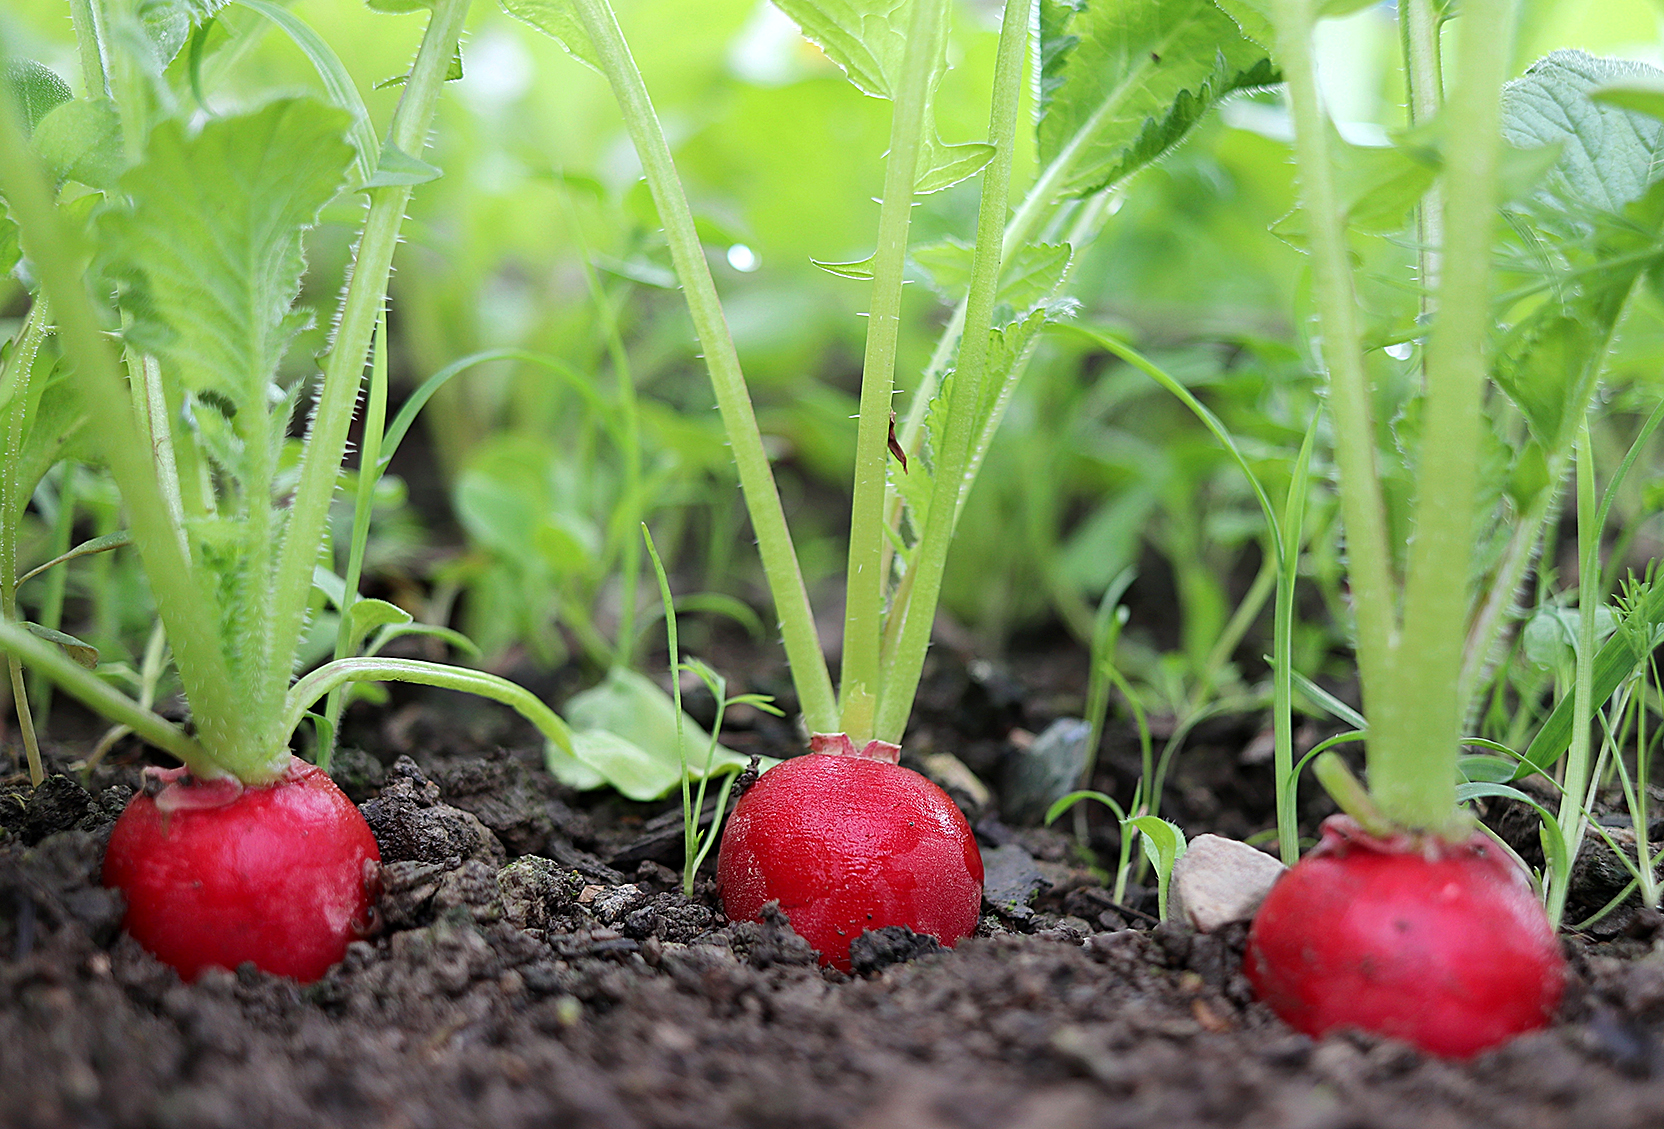 Red radish plant in soil. Radish growing in the garden bed.